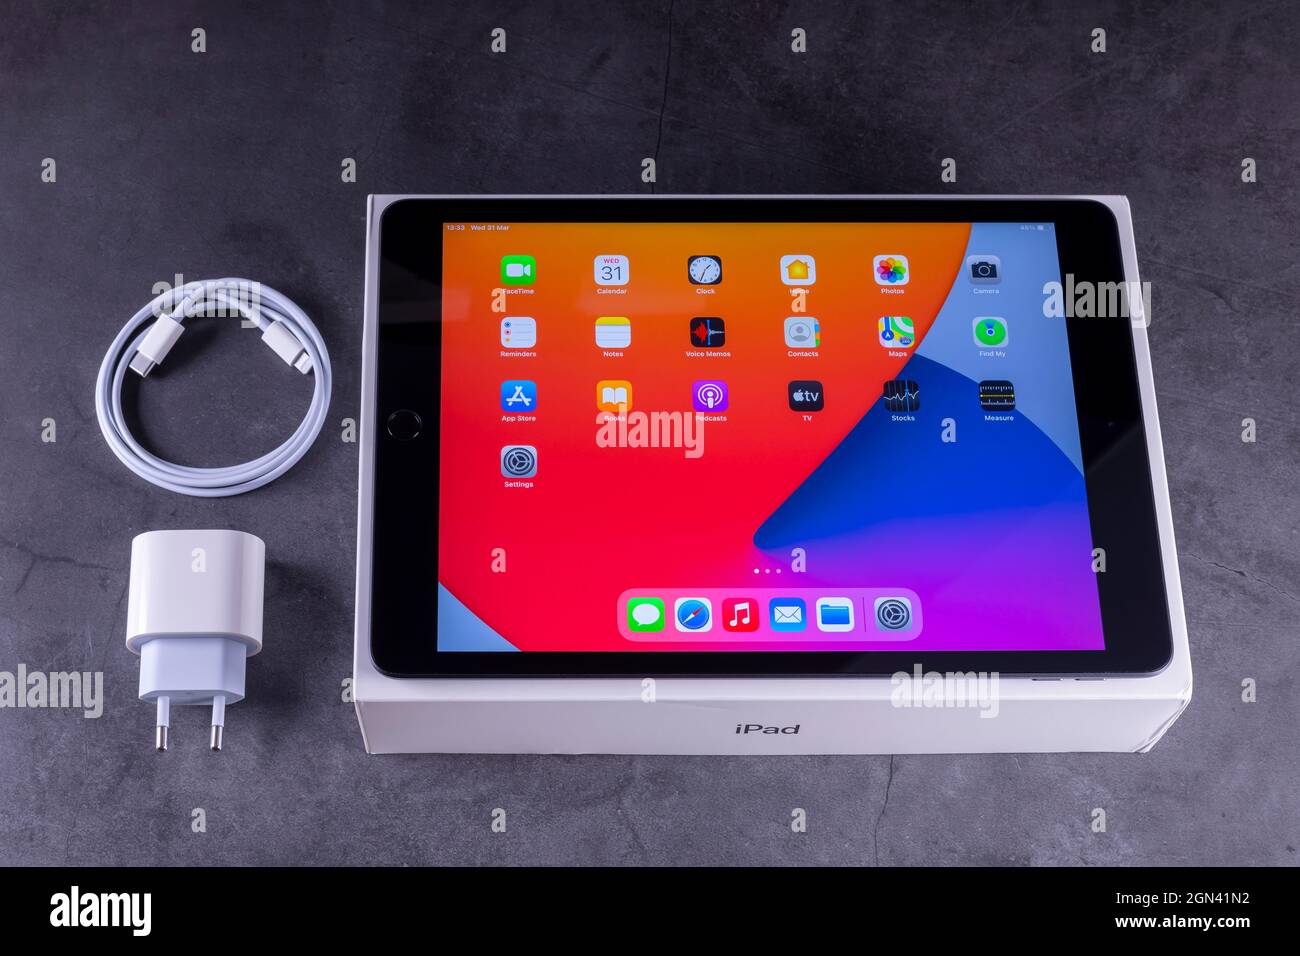 Galati, Romania, March 31, 2021: - Apple release new iPad 8th generation with the powerful A12 Bionic chip, support for Apple Pencil and the Smart Key Stock Photo